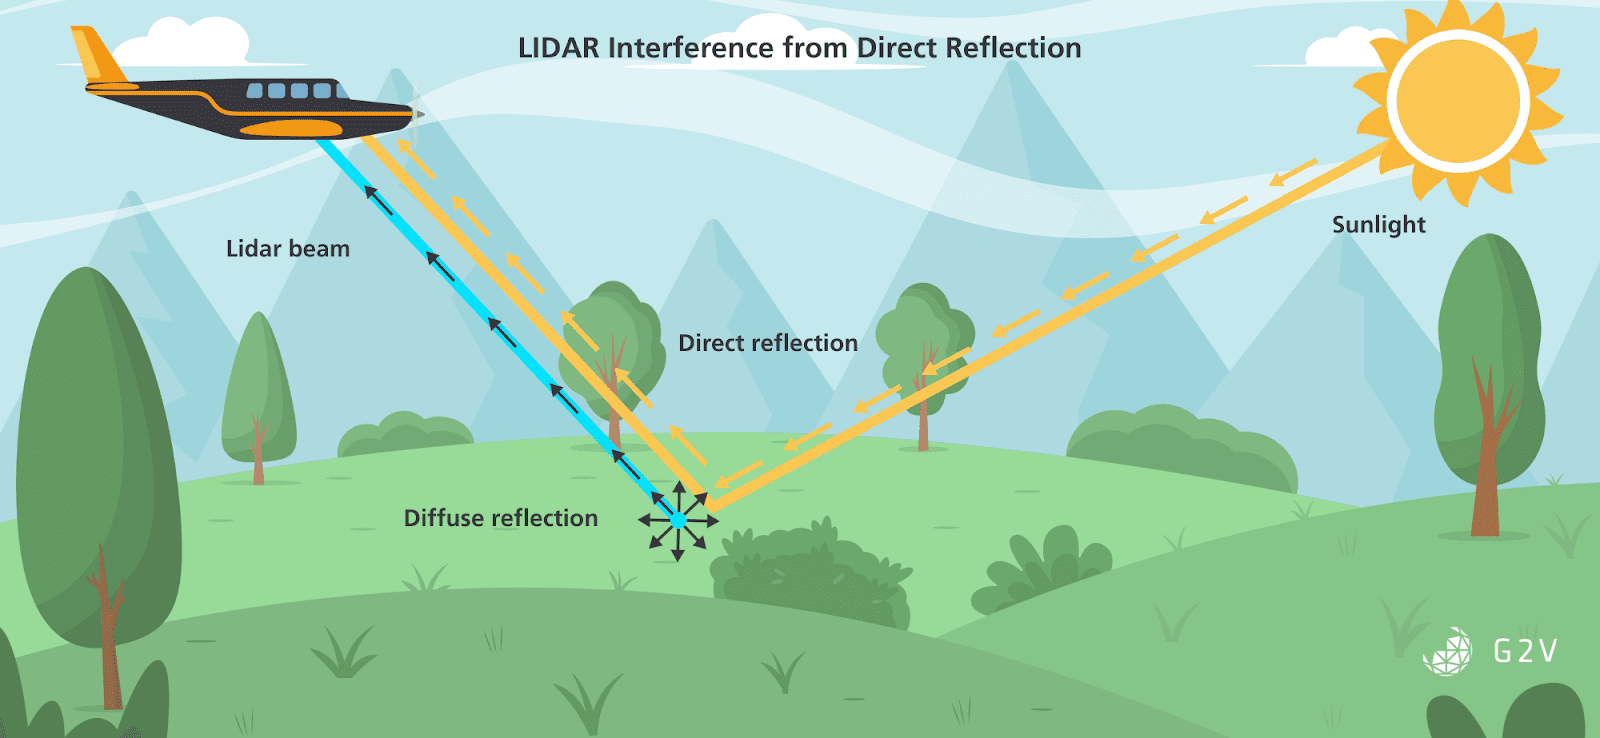 At high angles off-nadir, sunlight can be directly reflected from the ground, saturating the LIDAR detector and preventing useful data capture.